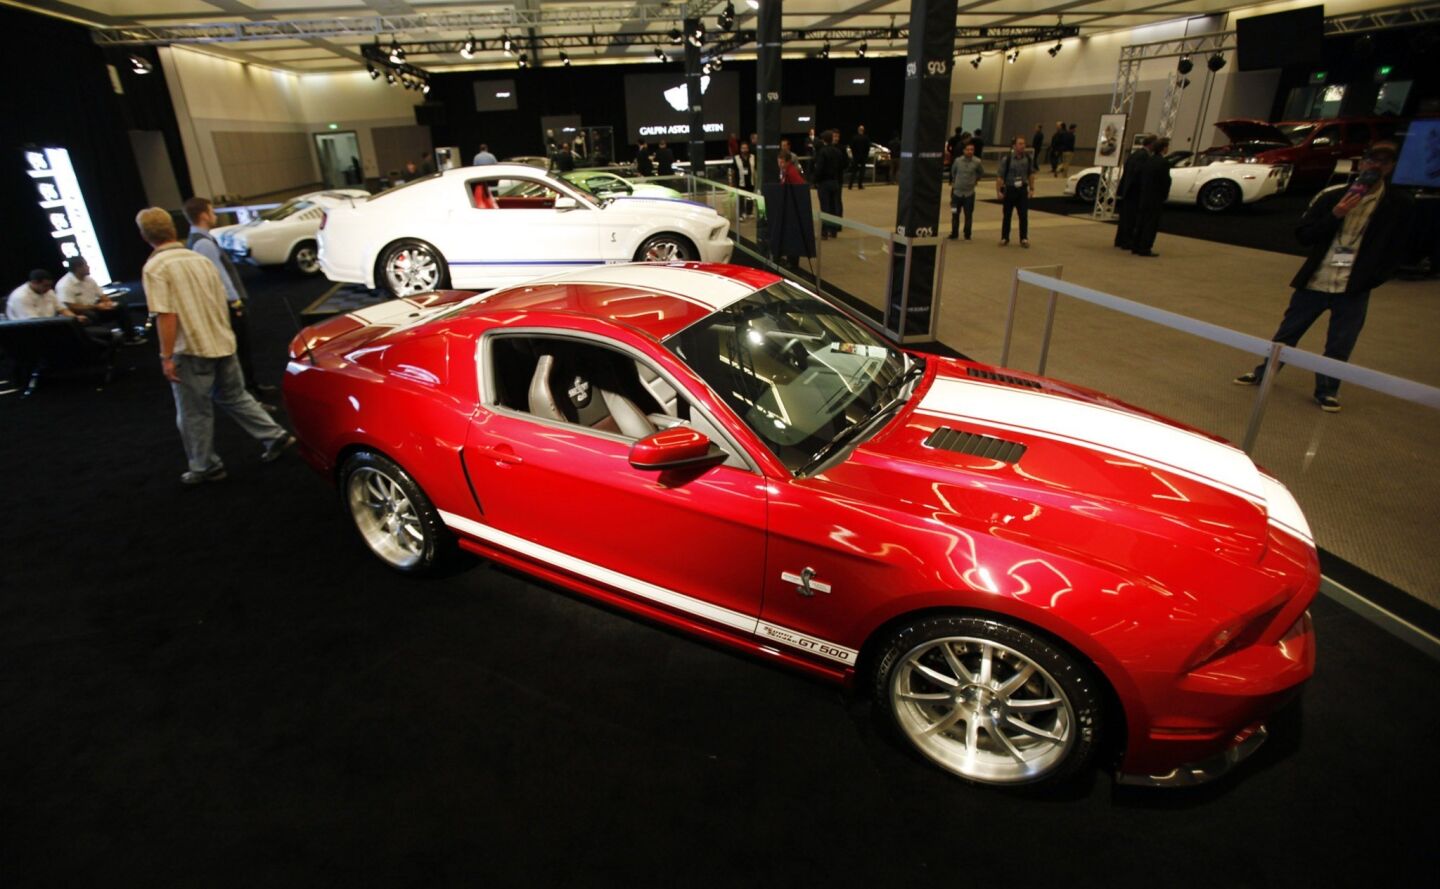 The 2013 GT 500 Super Snake by Shelby/Galpin Auto Sports.